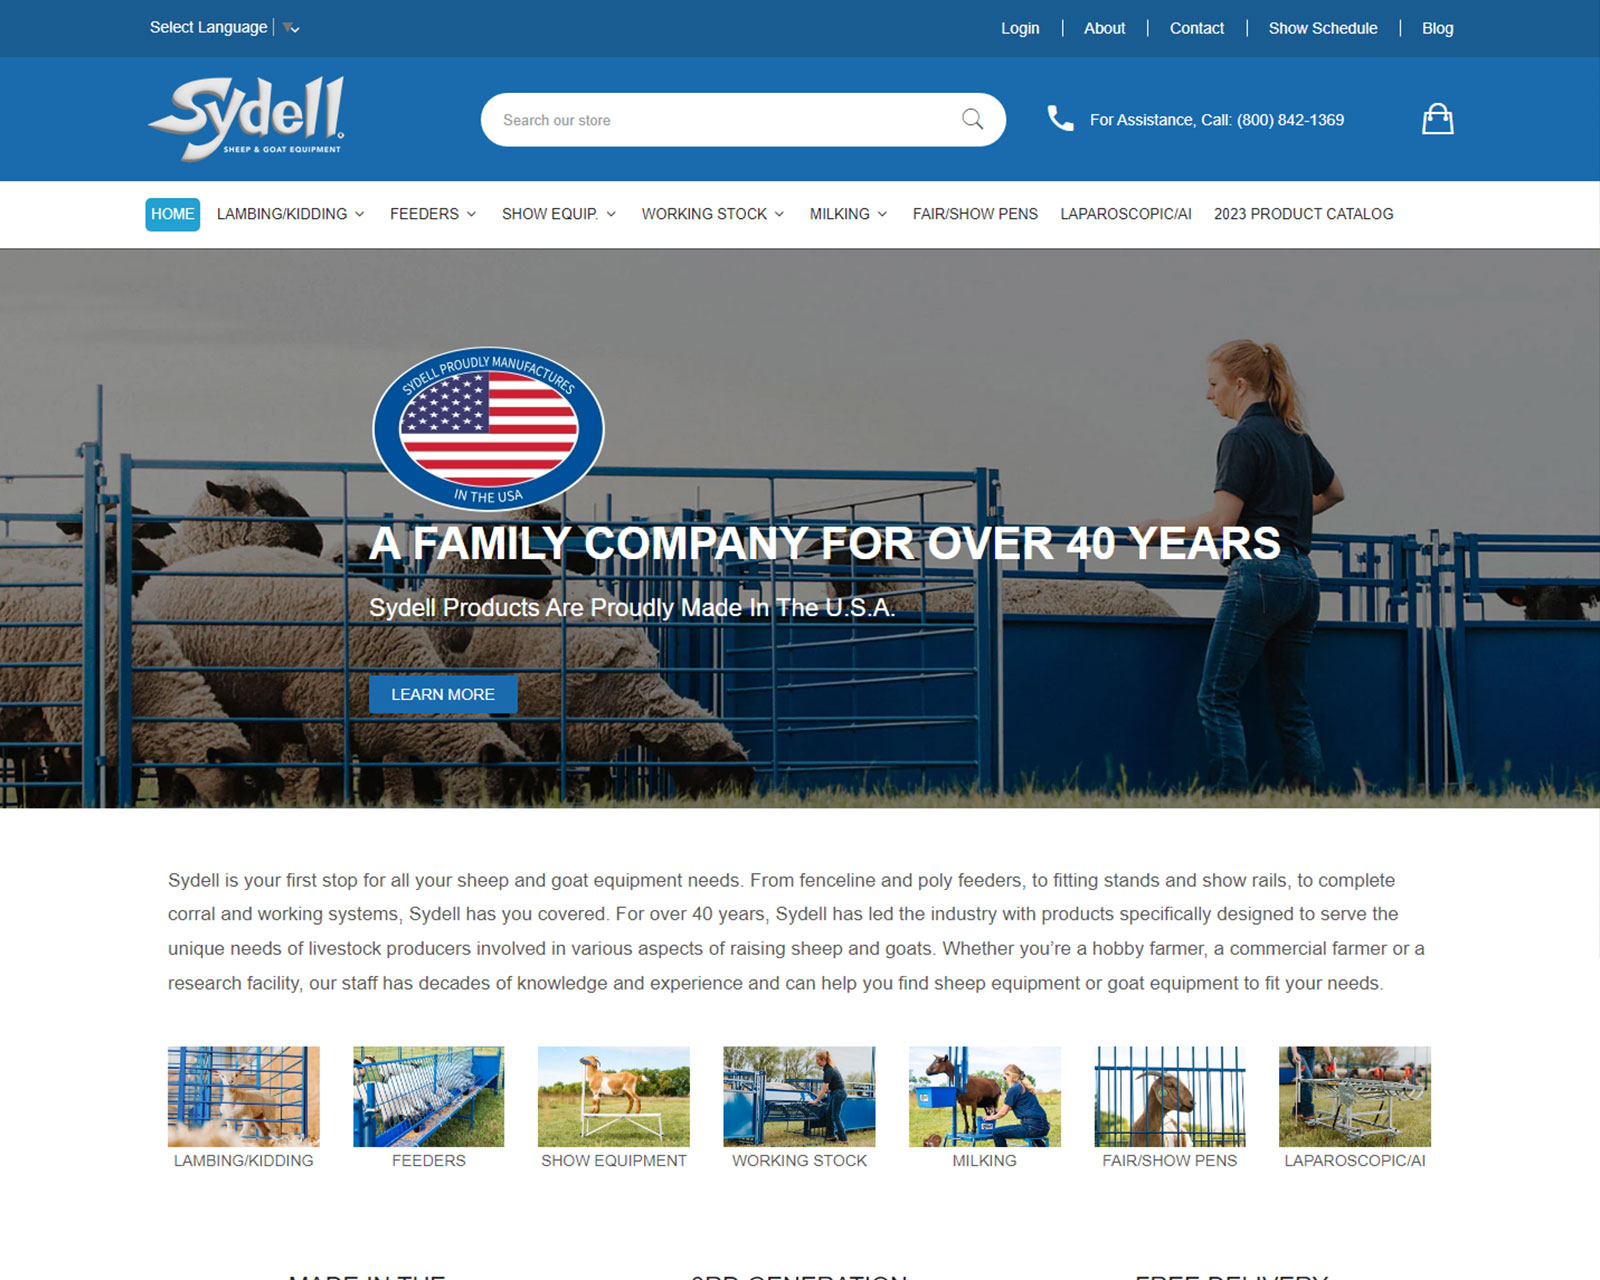 Sydell Sheep and Goat Equipment